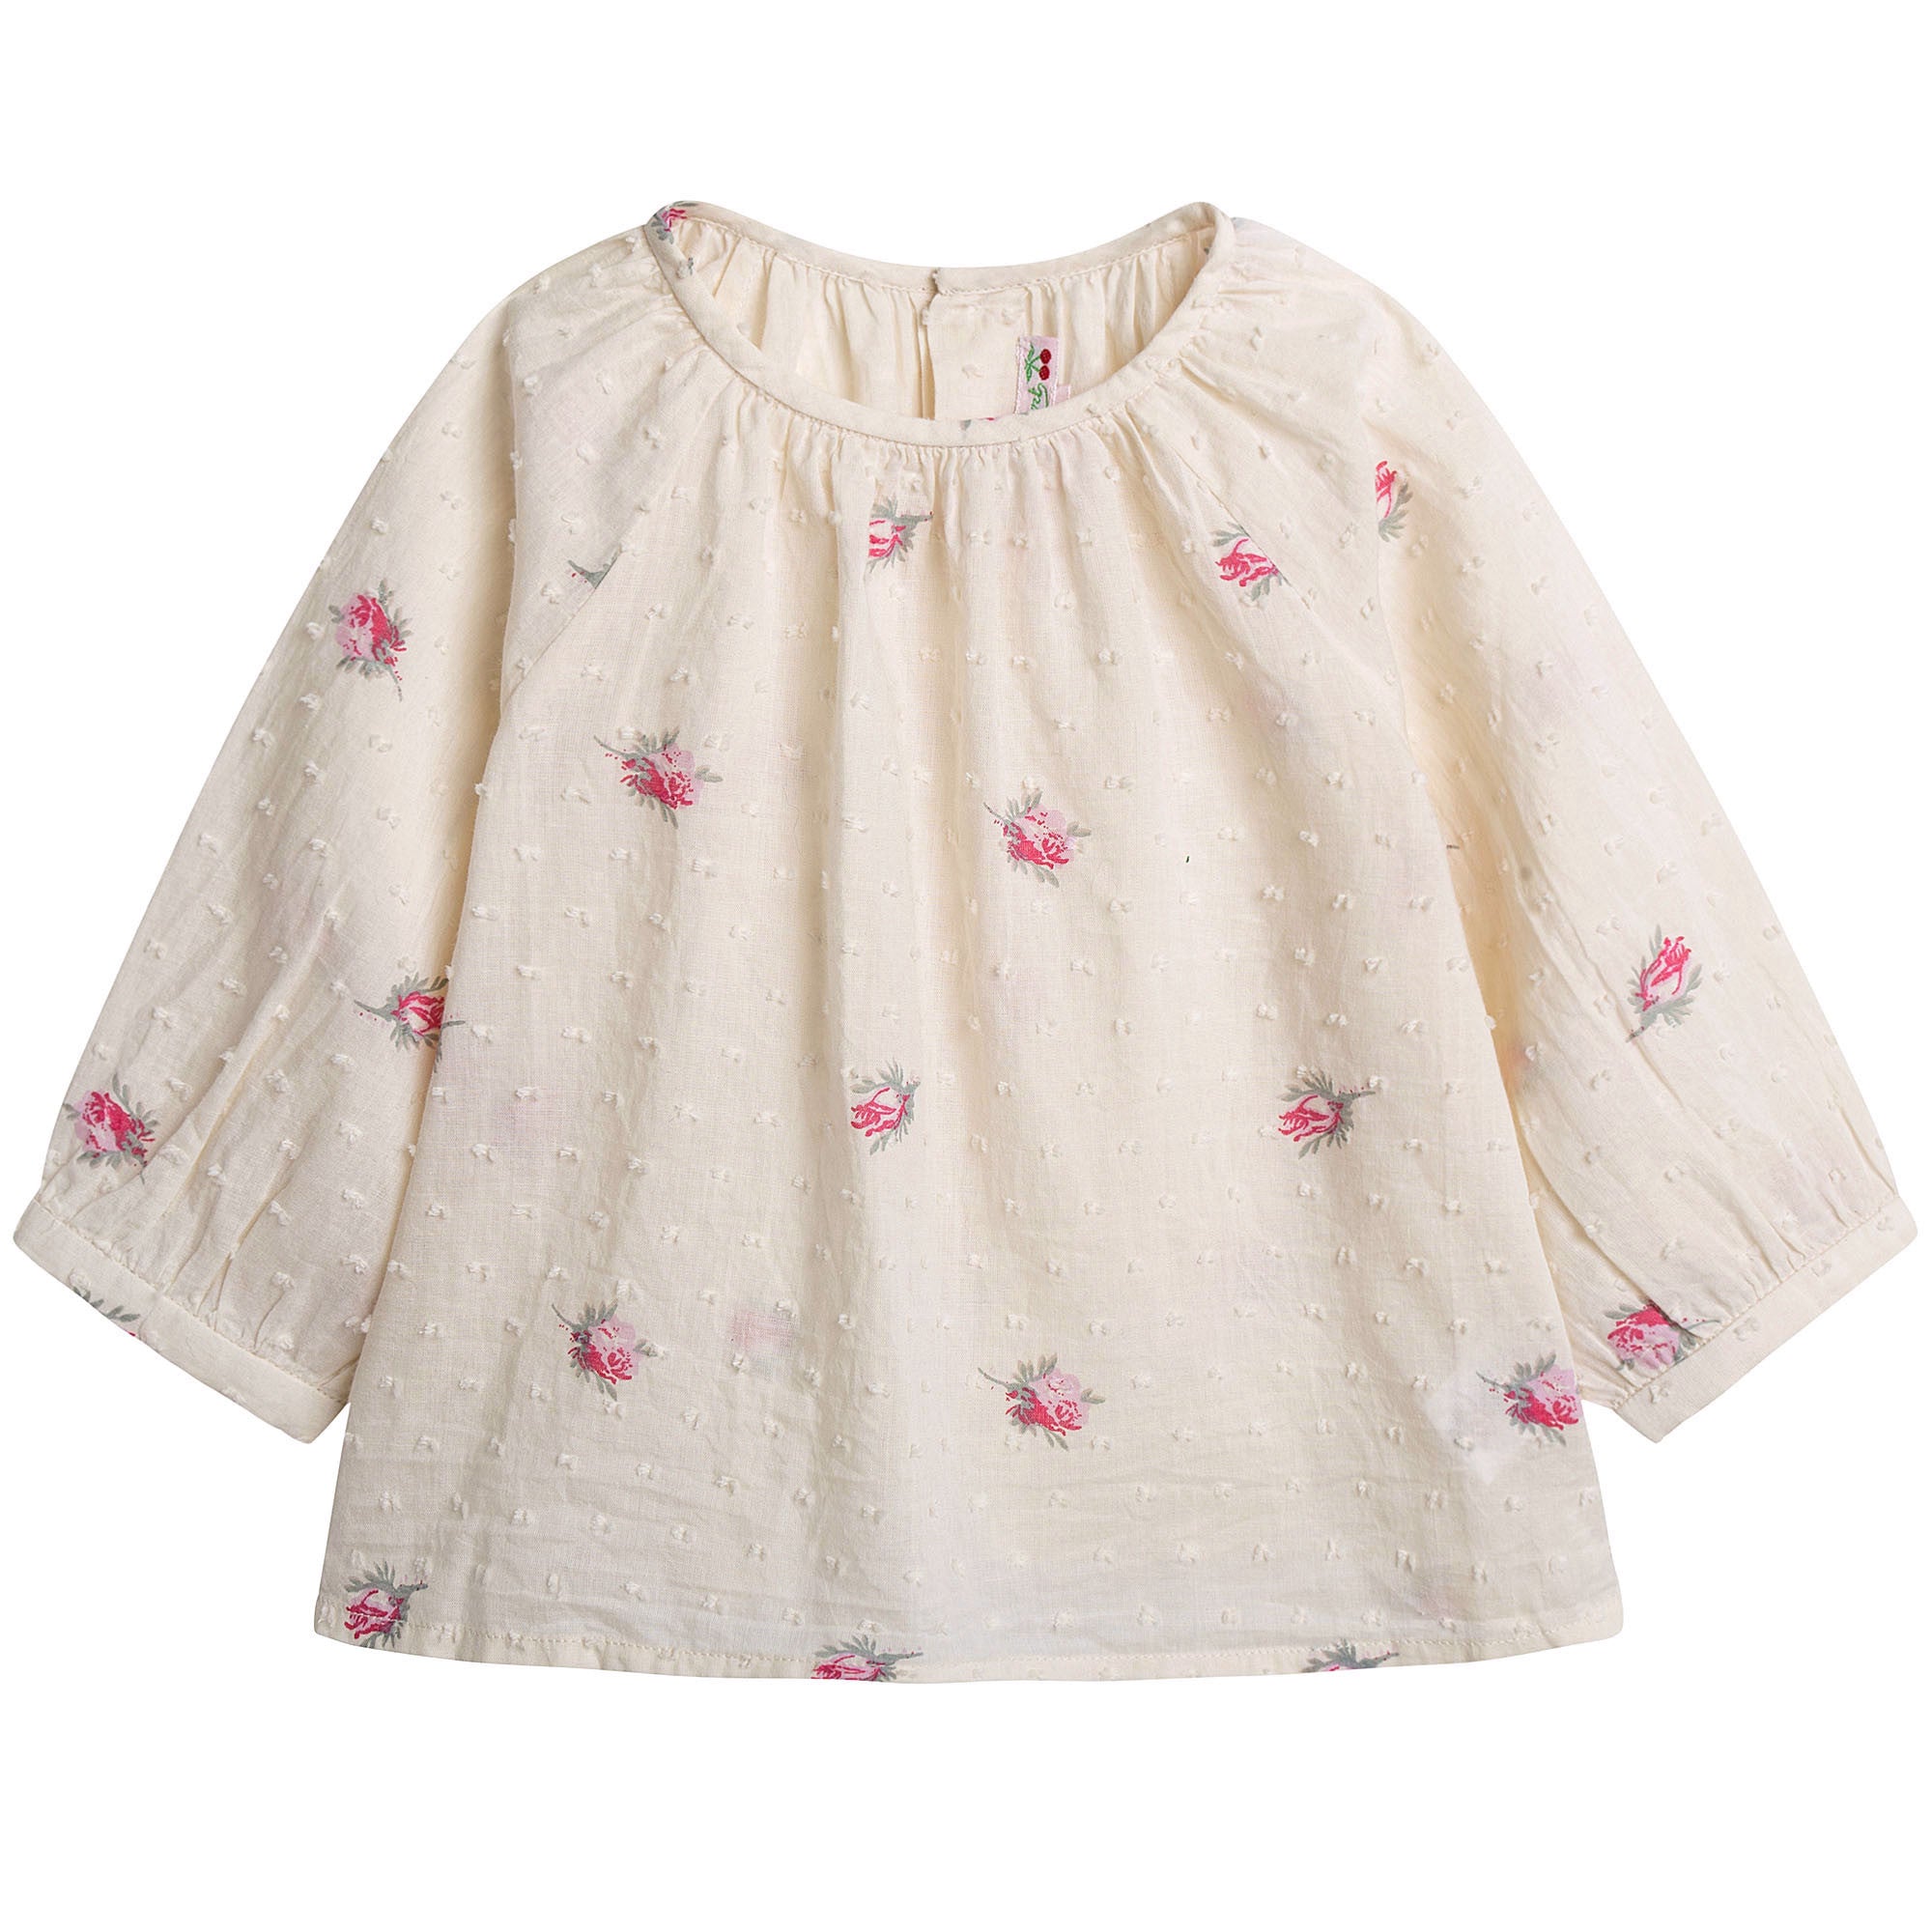 Baby Girls Lvory With Pink Flowers Blouse - CÉMAROSE | Children's Fashion Store - 1